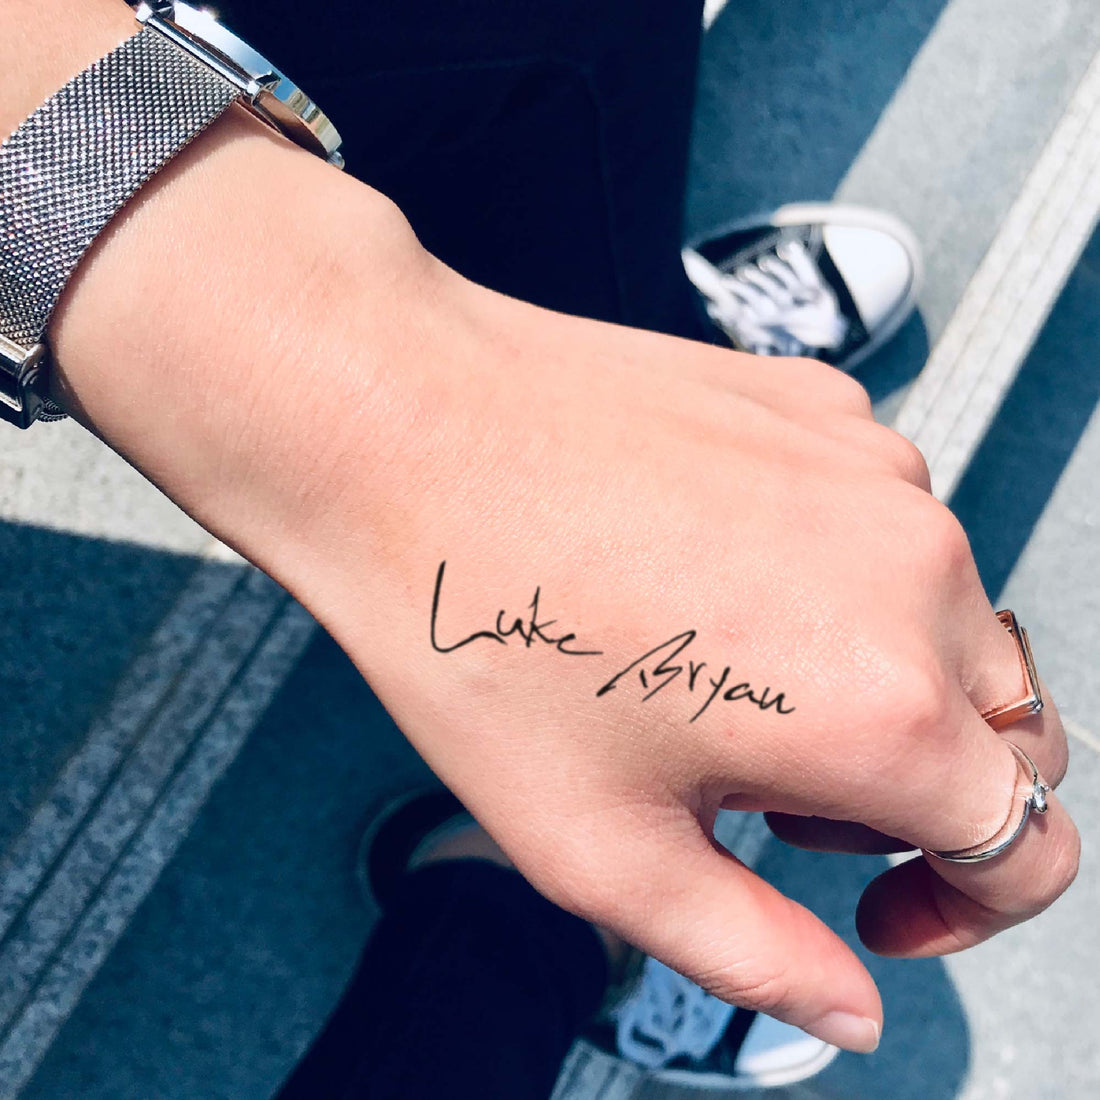 Luke Bryan custom temporary tattoo sticker design idea inspiration meanings removal arm wrist hand words font name signature calligraphy lyrics tour concert outfits merch accessory gift souvenir costumes wear dress up code